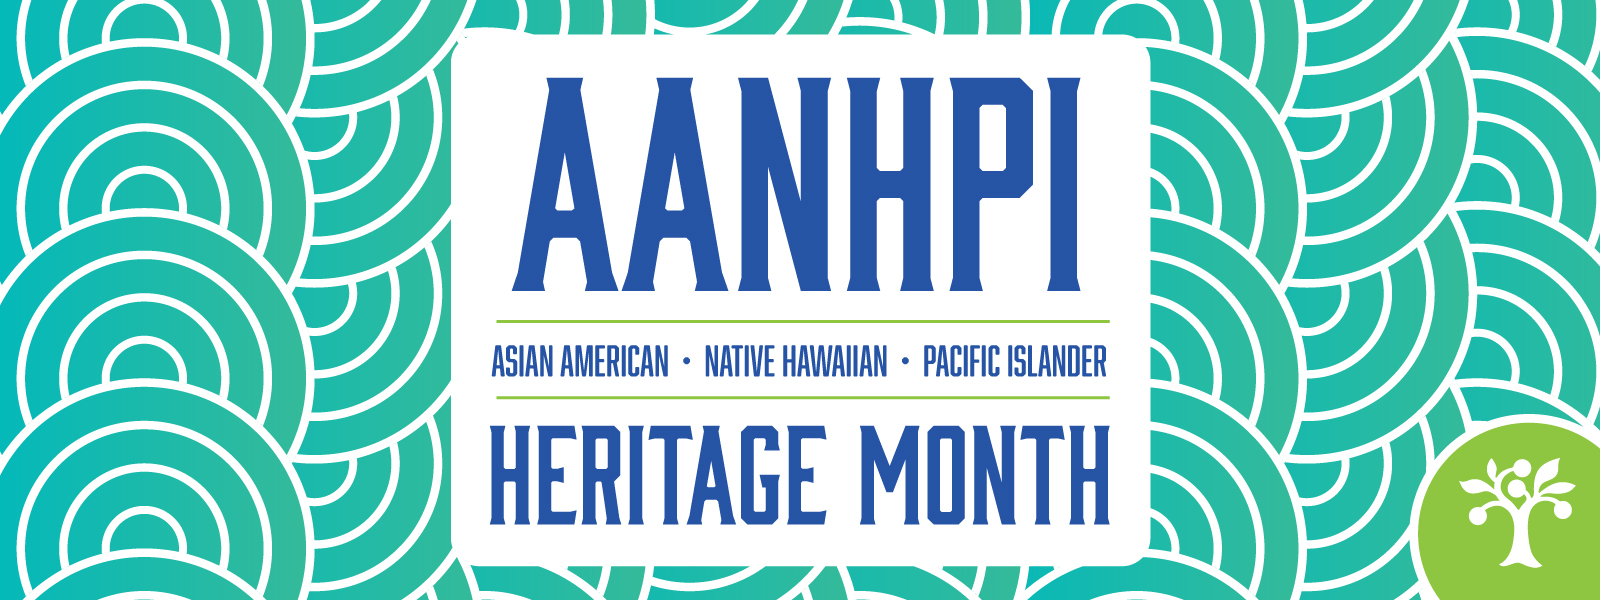 A graphic for Asian American, Native Hawaiian, and Pacific Islander Heritage Month